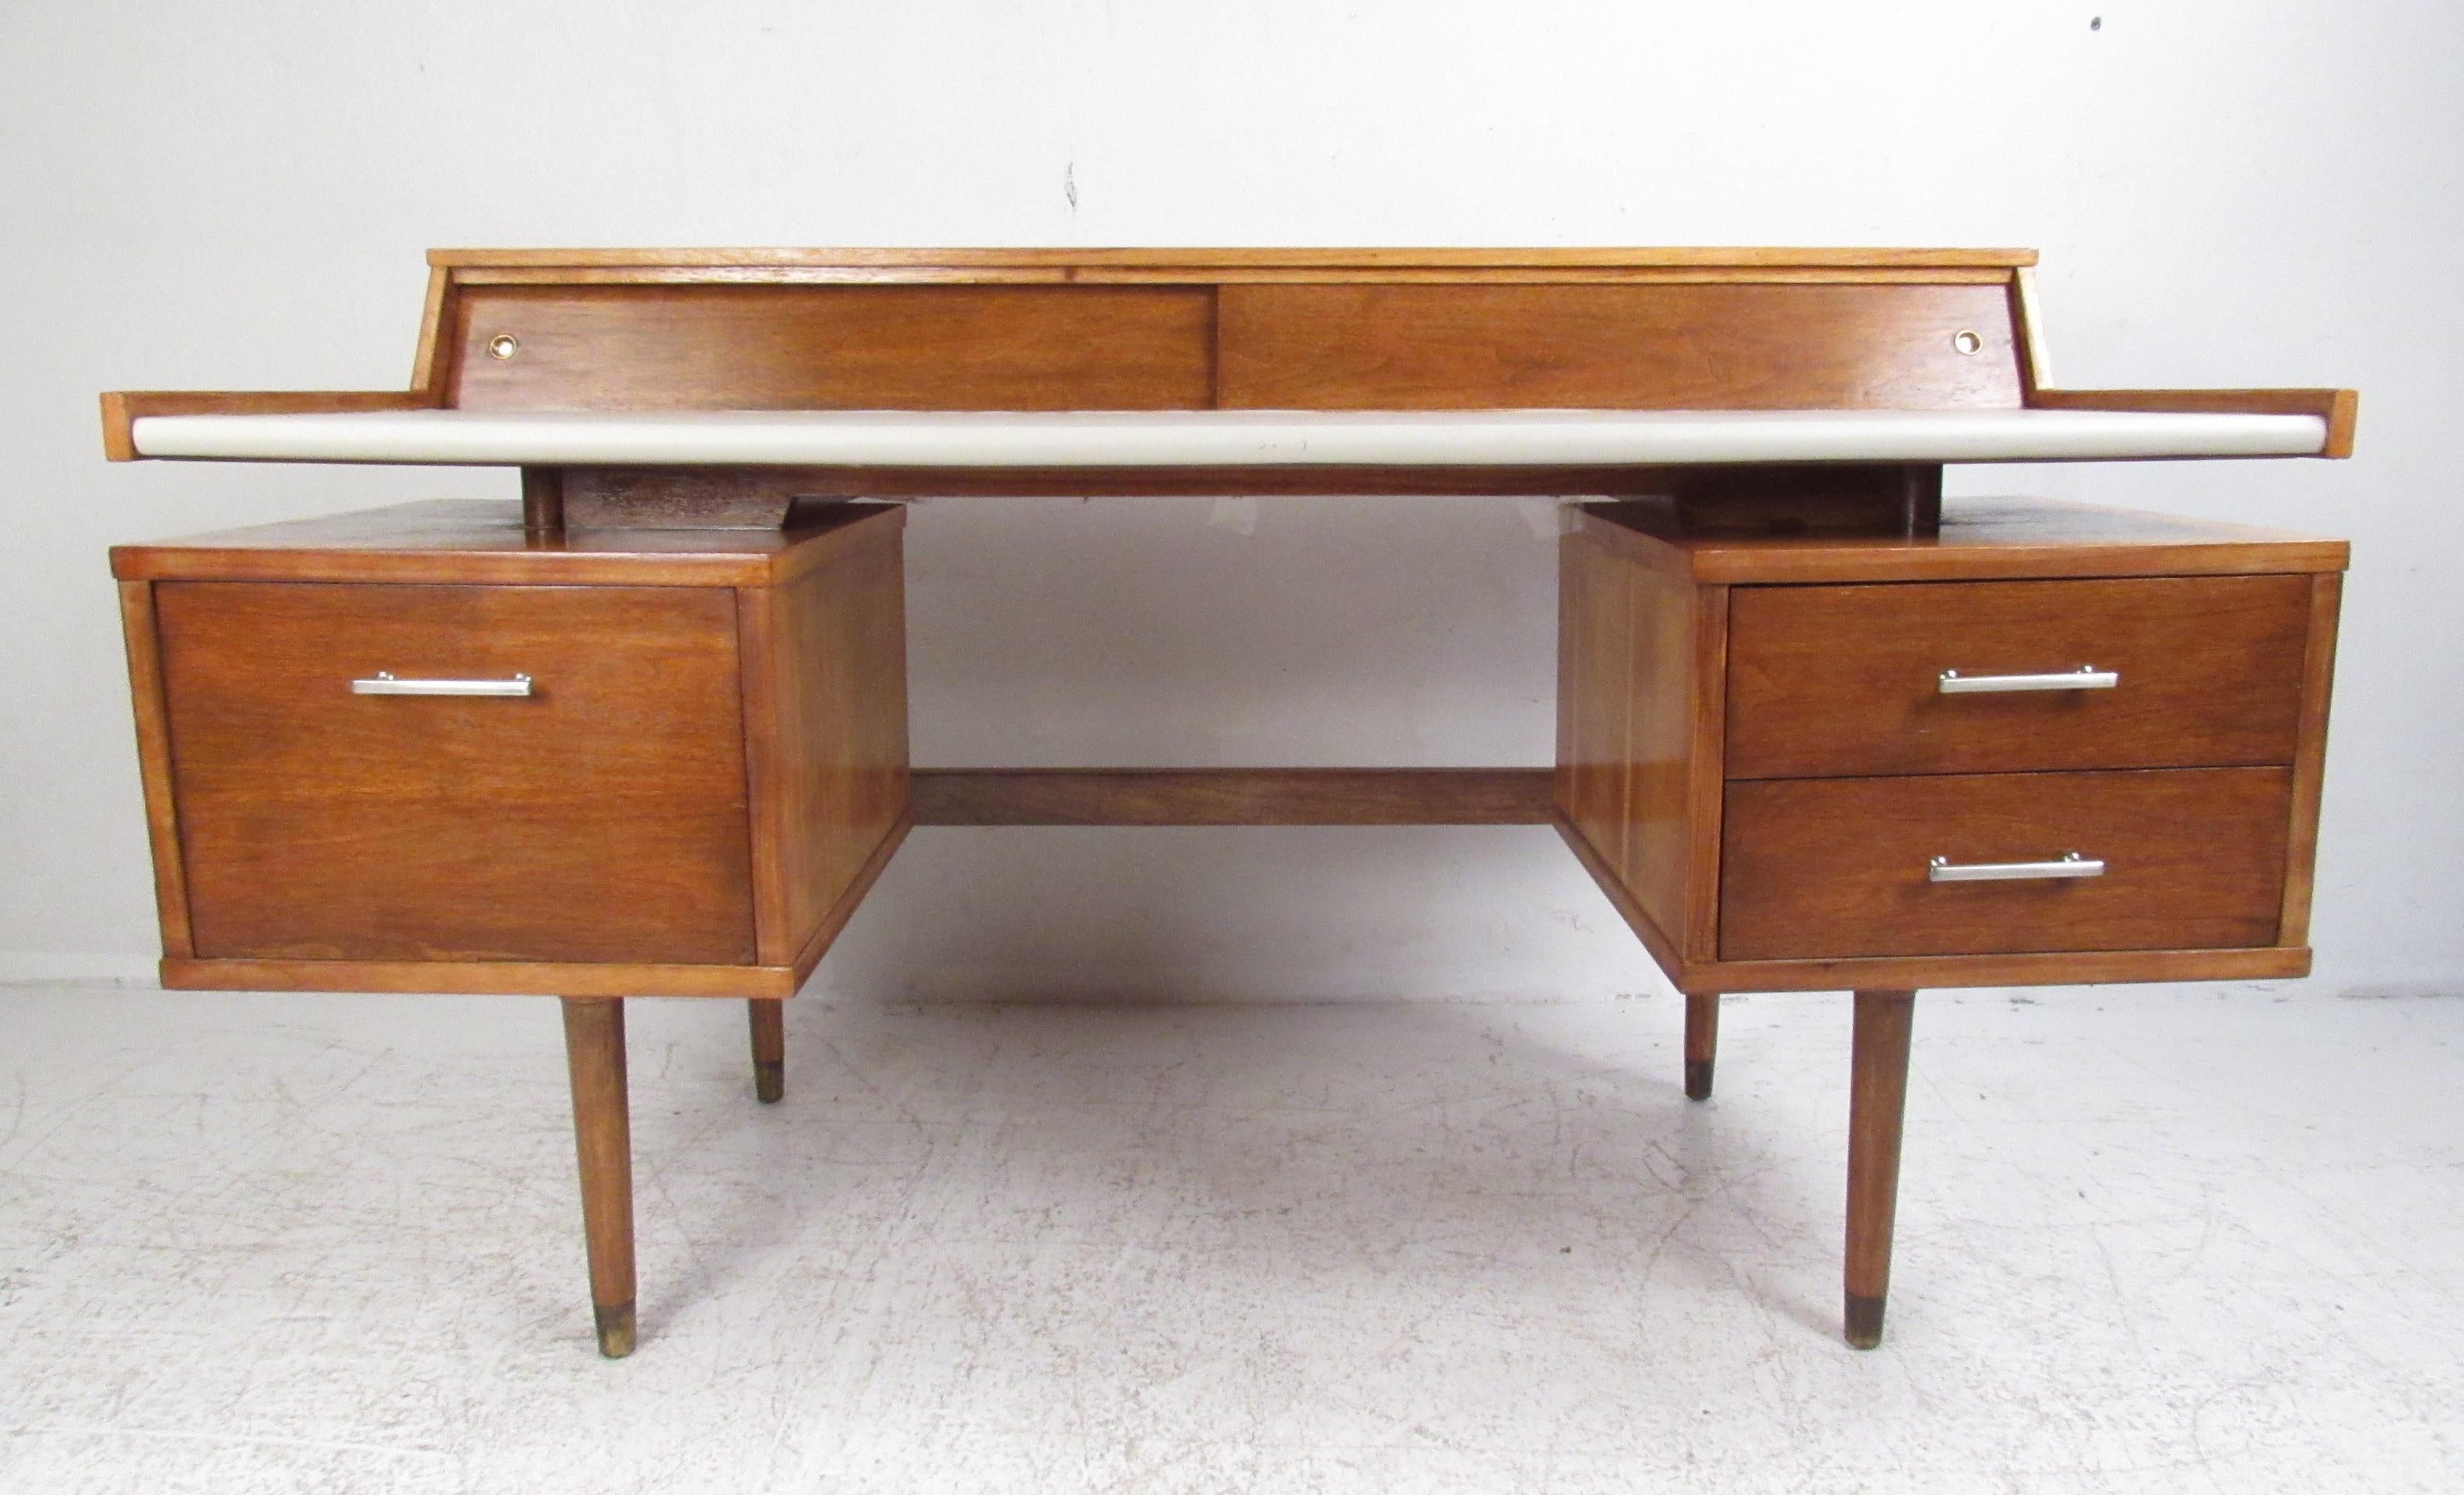 This stunning vintage modern floating top desk features a large white vinyl work space and plenty of room for storage. A stylish walnut writing desk by John Van Koert with a sliding door on top hiding small storage compartments. The sculpted design,